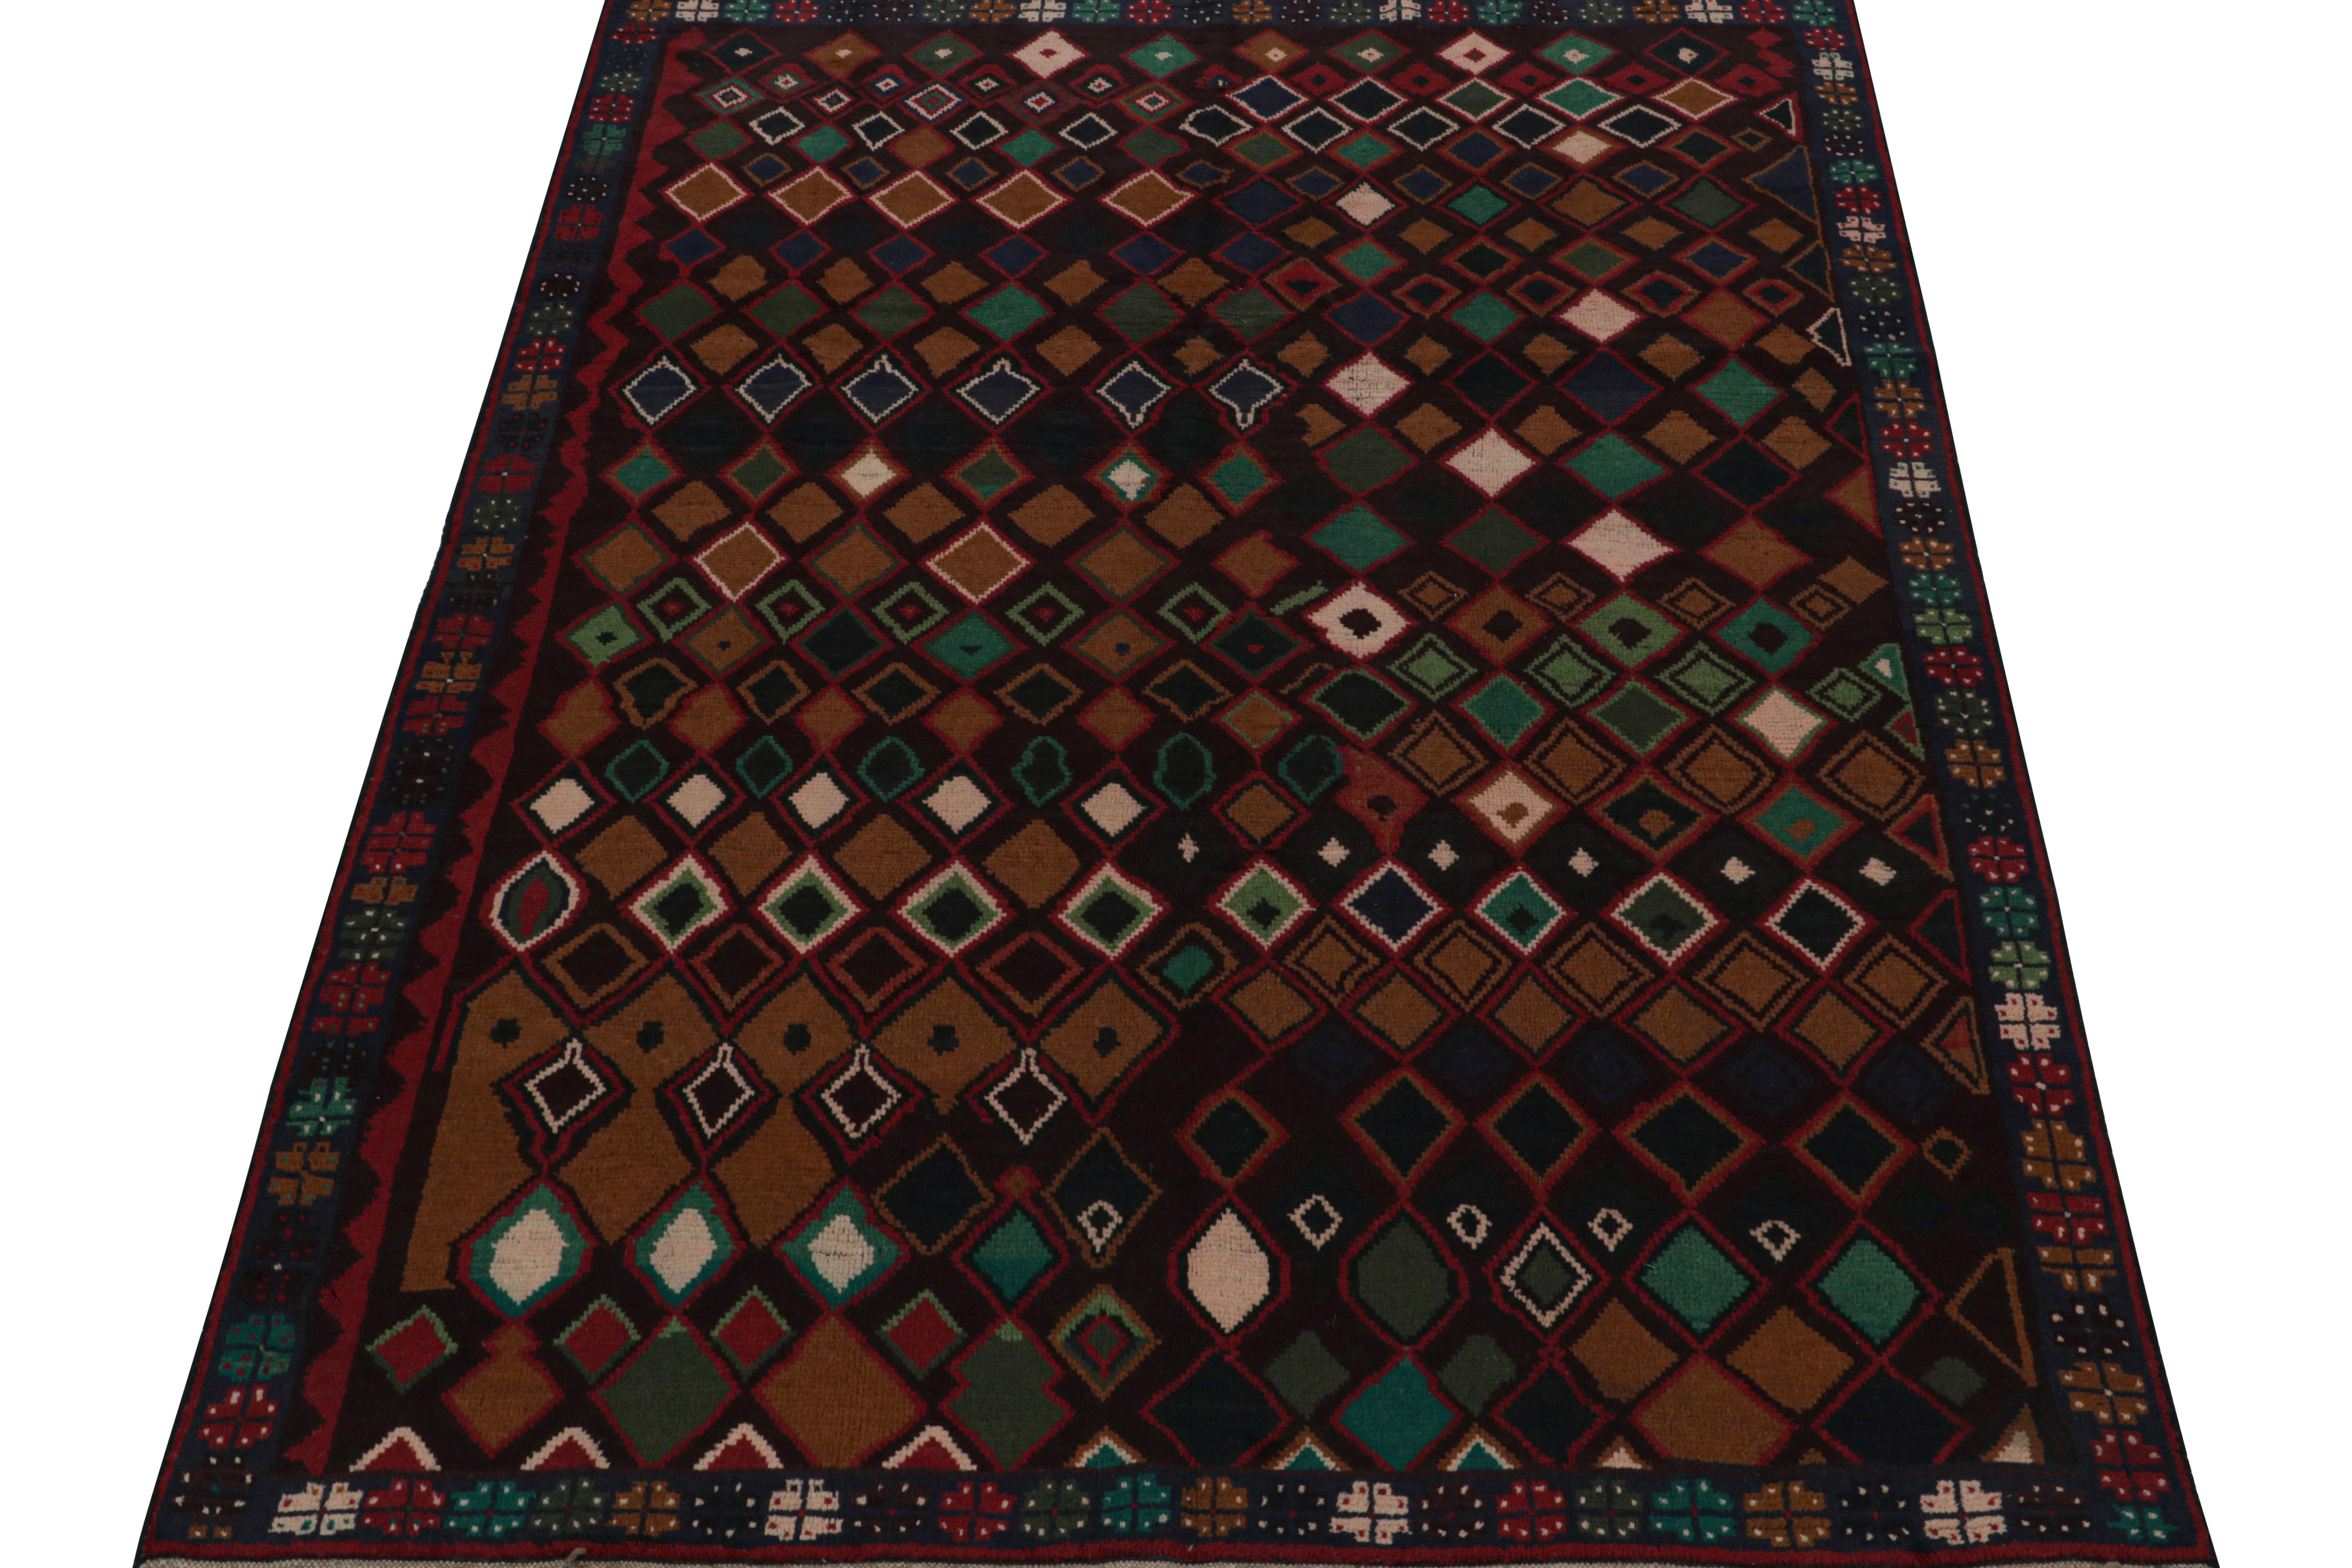 Afghan Rug & Kilim’s Baluch Tribal Rug in Burgundy with Colorful Diamond Patterns For Sale